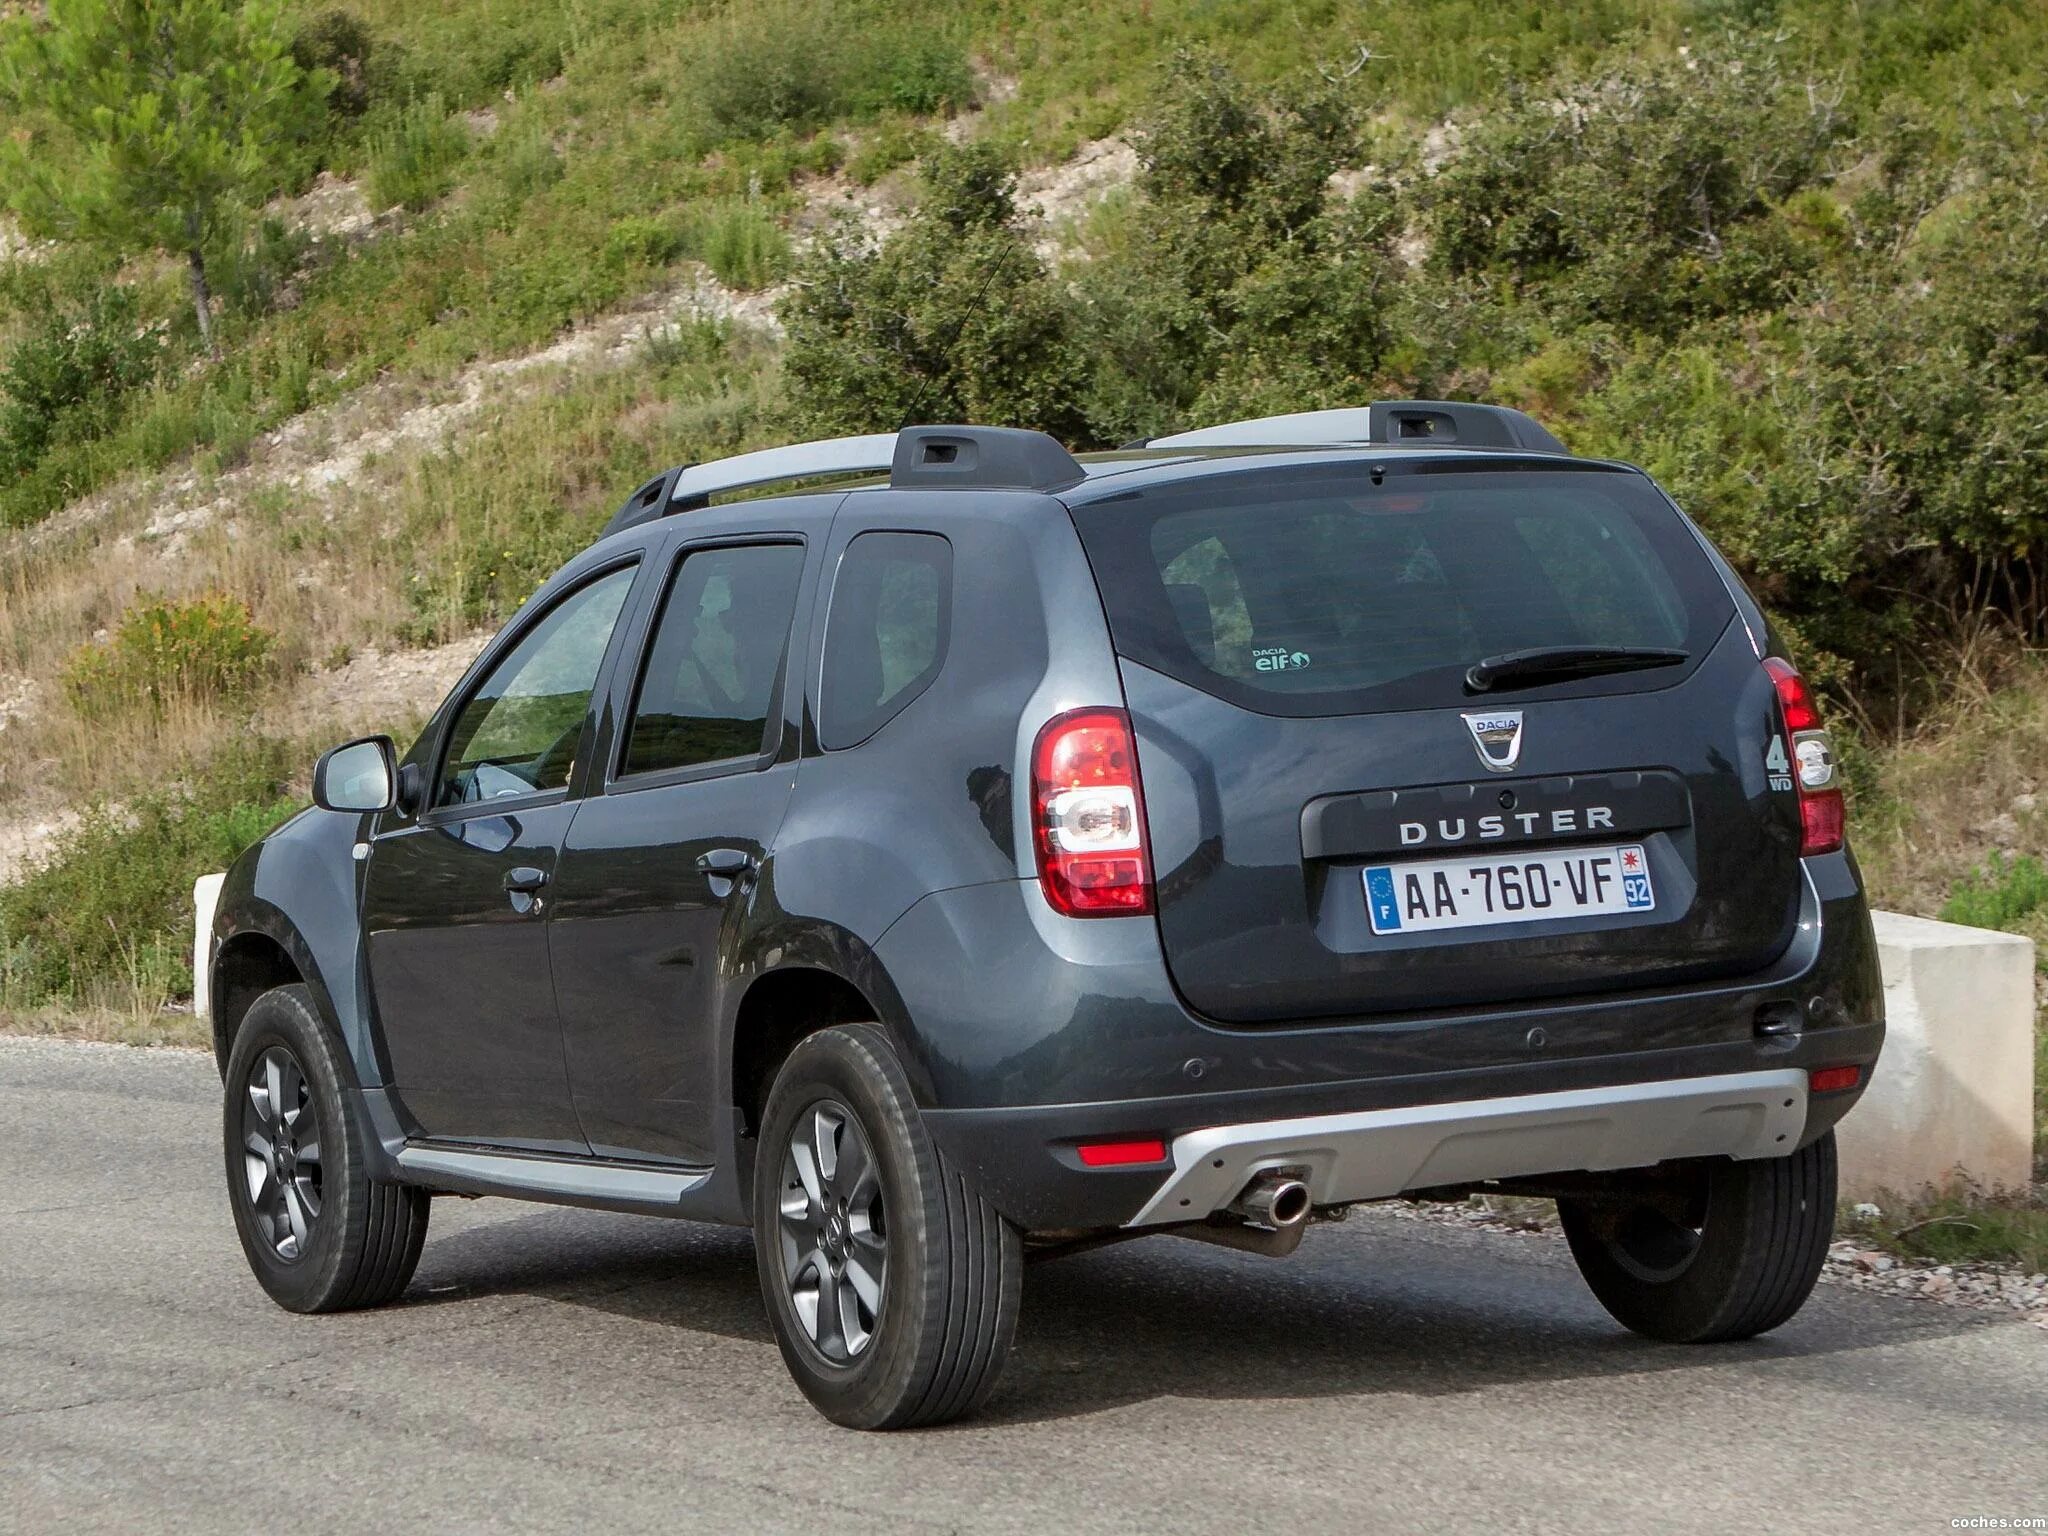 Renault Duster 2013. Рено Дастер 2013. Dacia Duster 2013. Dacia Duster 2012. Купить рено дастер 2014г